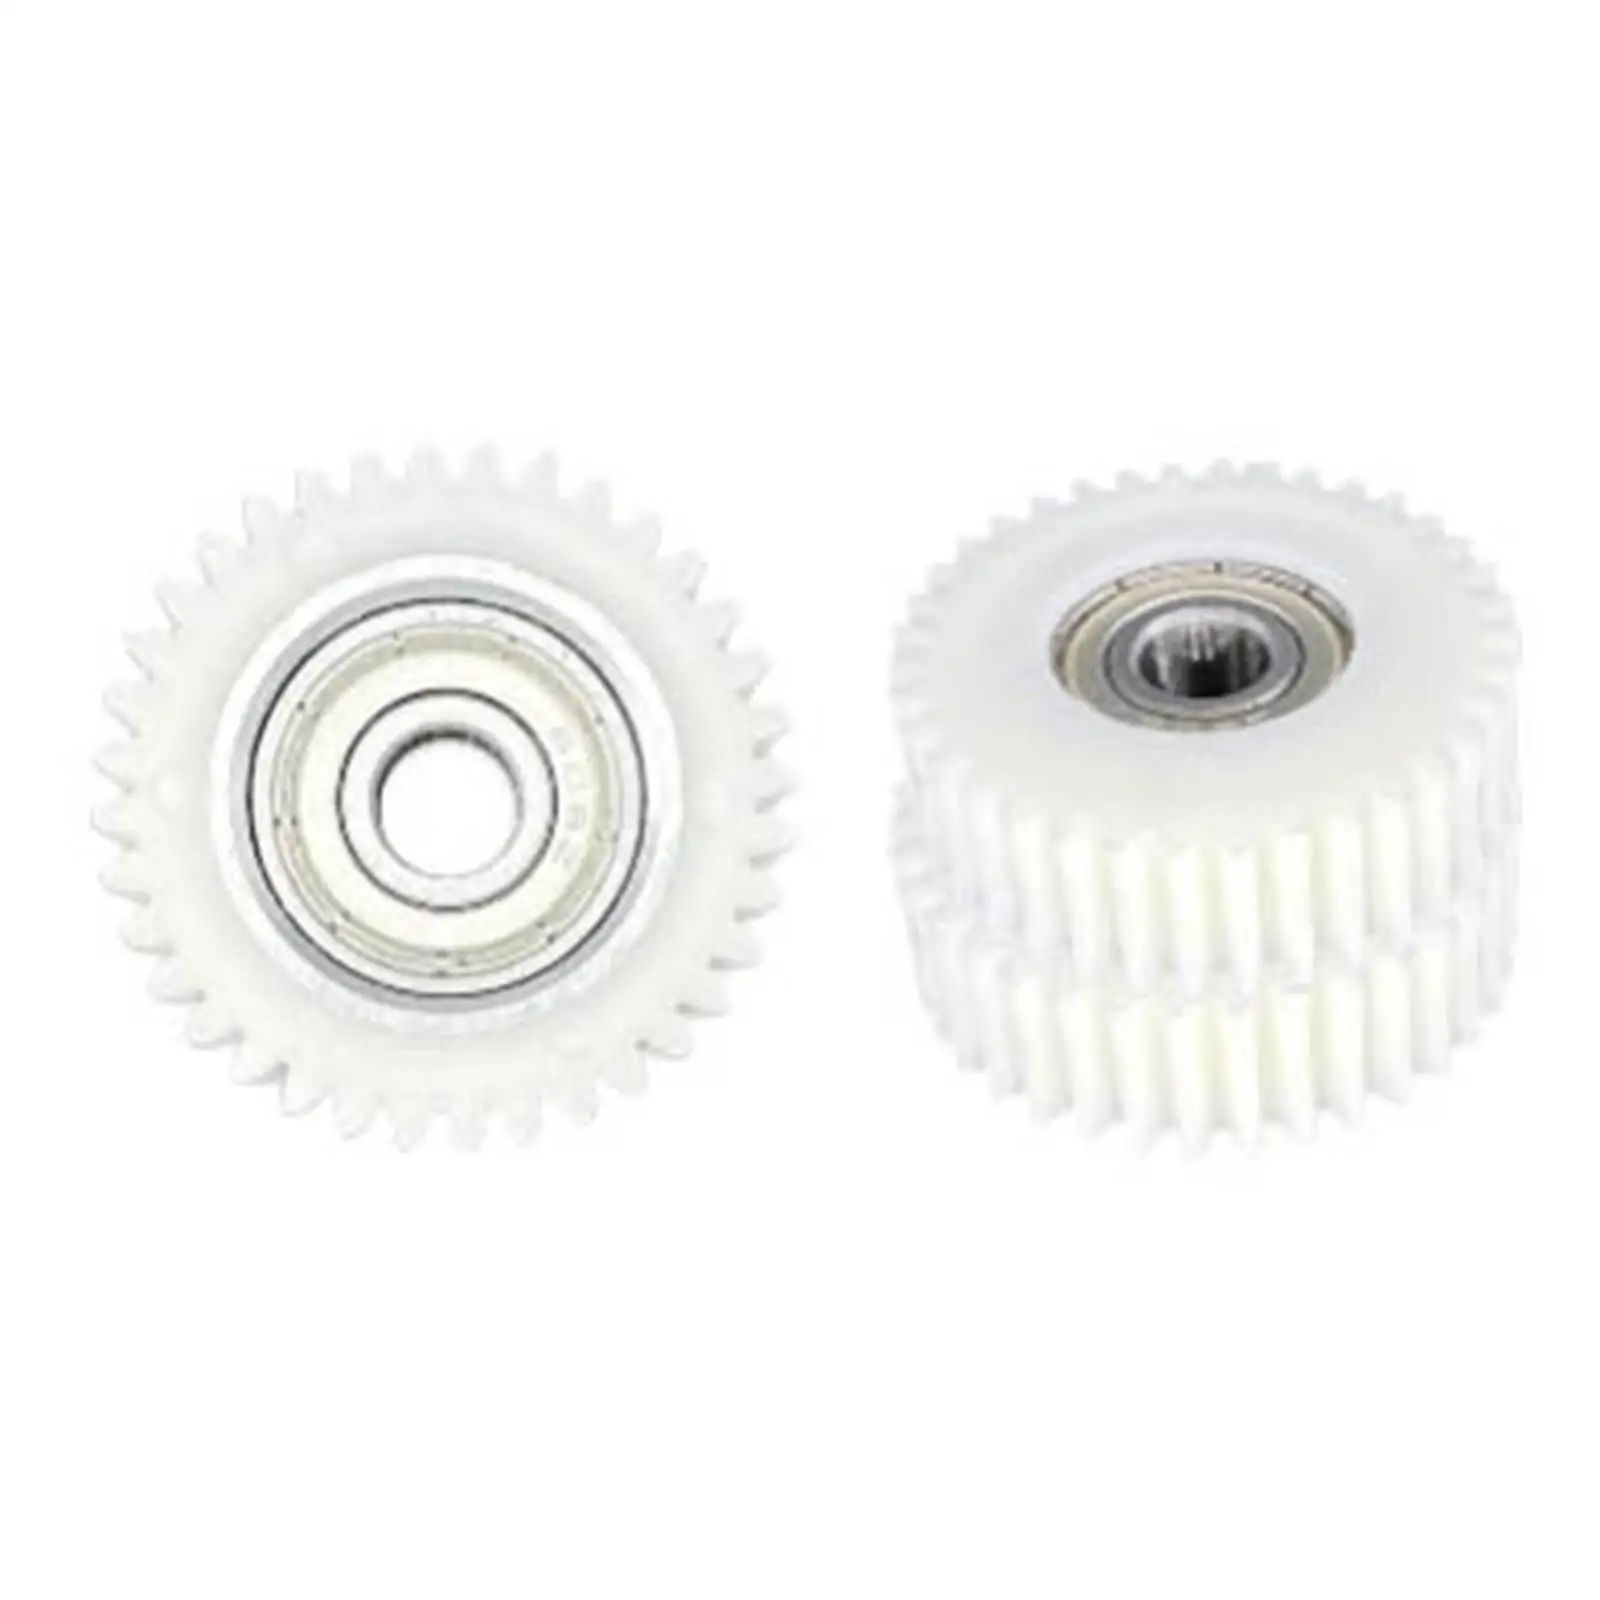 3x Nylon 36T Planetary Gears Part Solid for  Motor Electric Vehicle